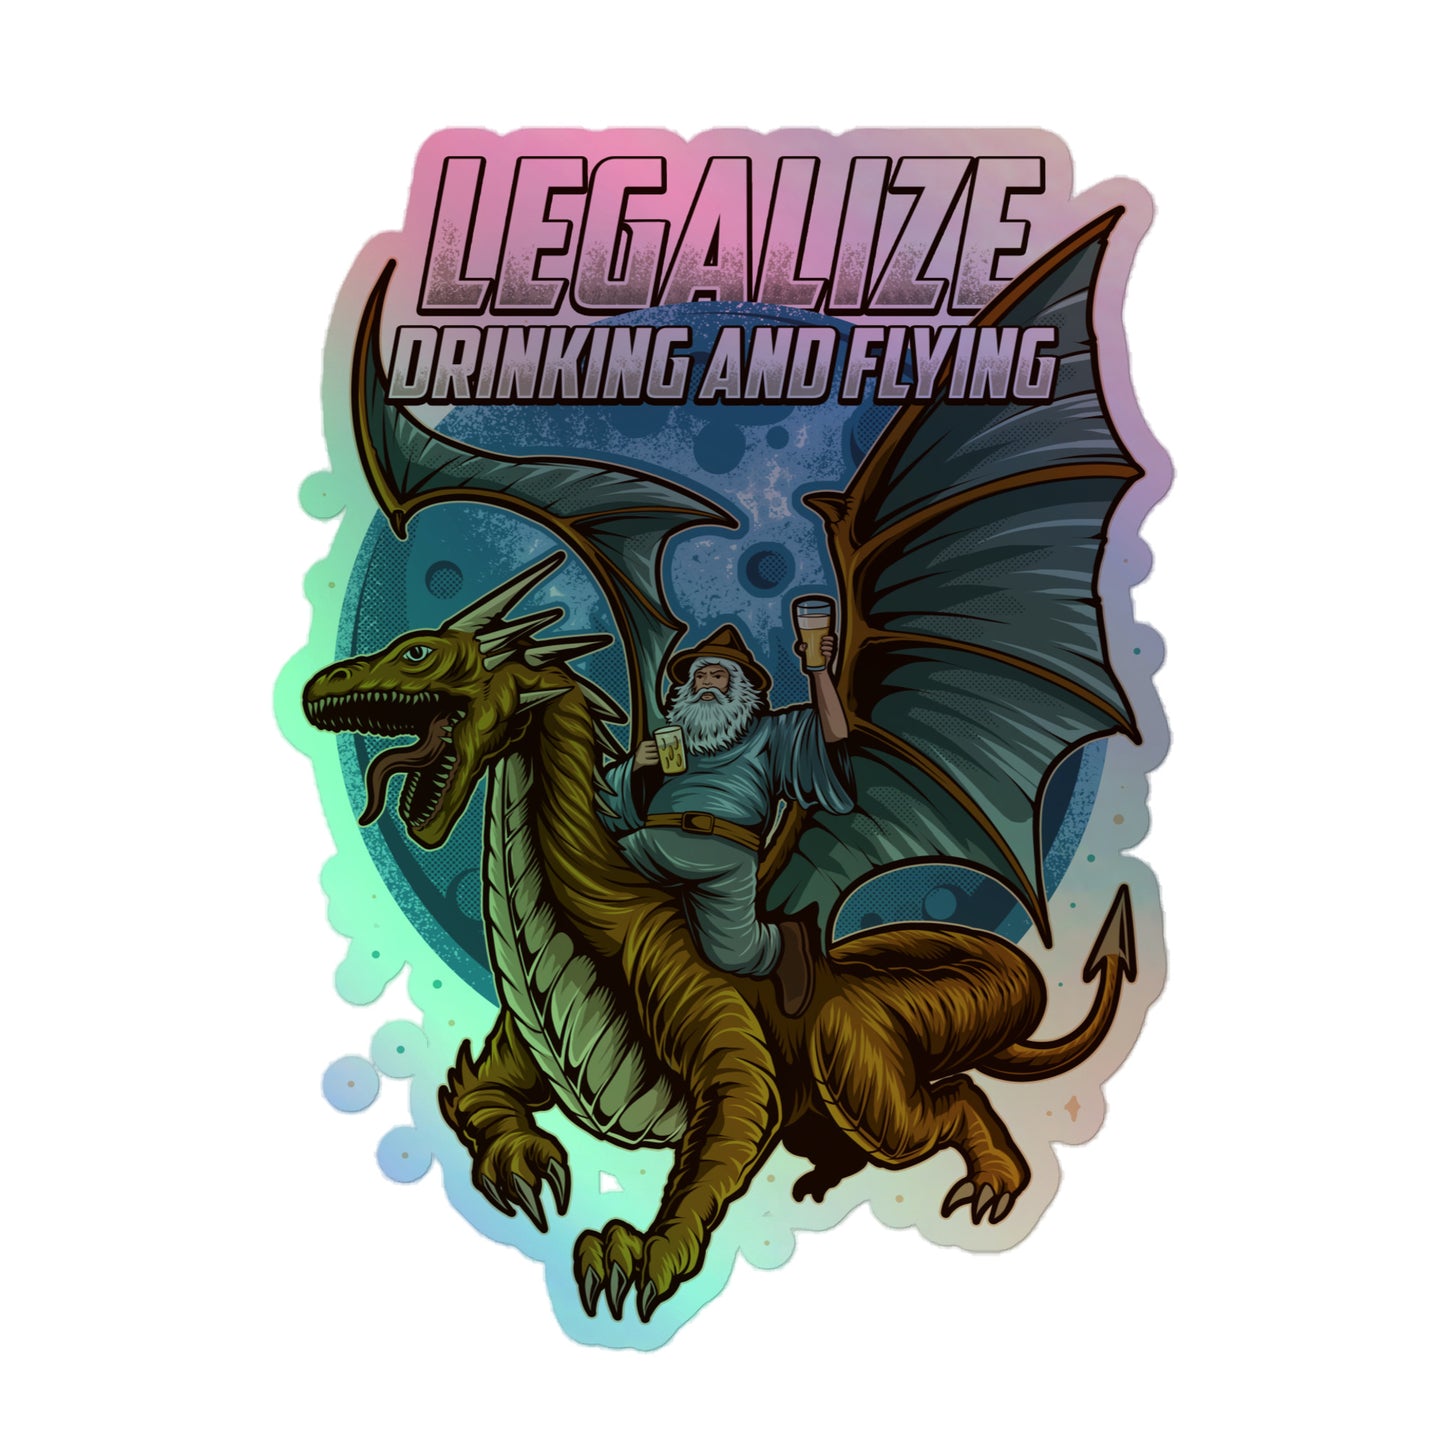 Legalize drinking and flying (sticker)